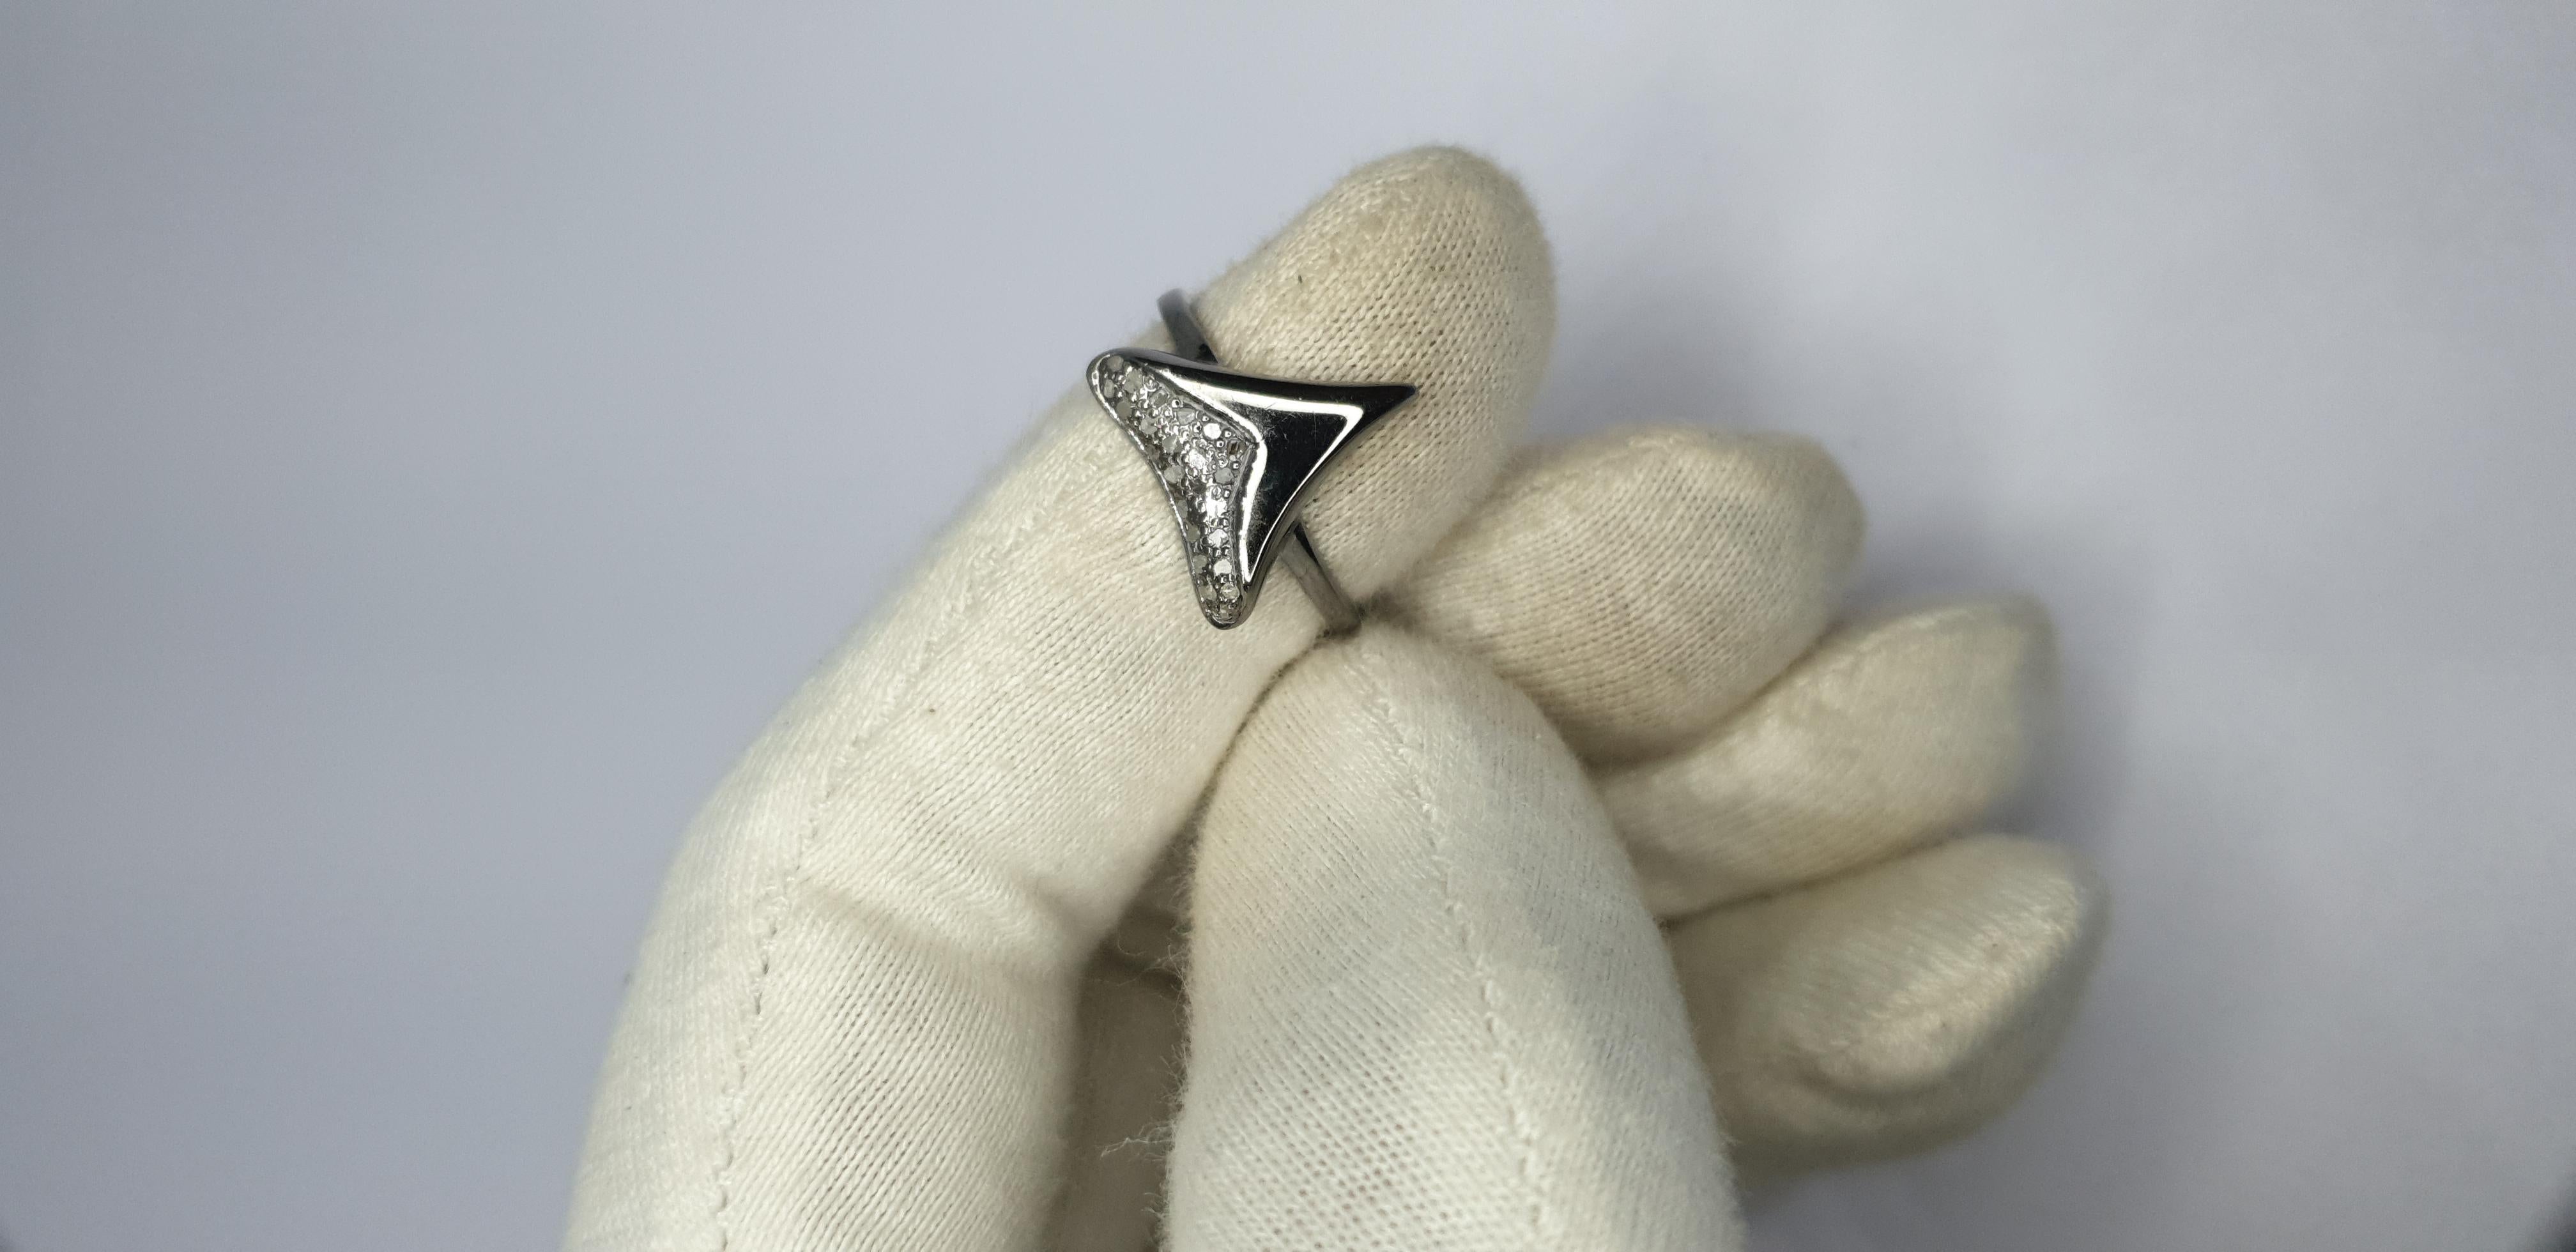 Shark Tooth Ring Pave Diamond Birthday Gift Ring 925 Silver Diamond Present Ring

Diamond Weight: 0.25 Cts Approx
Size : 14x15mm Approx
Certification: 925 Hallmarked
Gross Weight: 4.50 Grams Approx